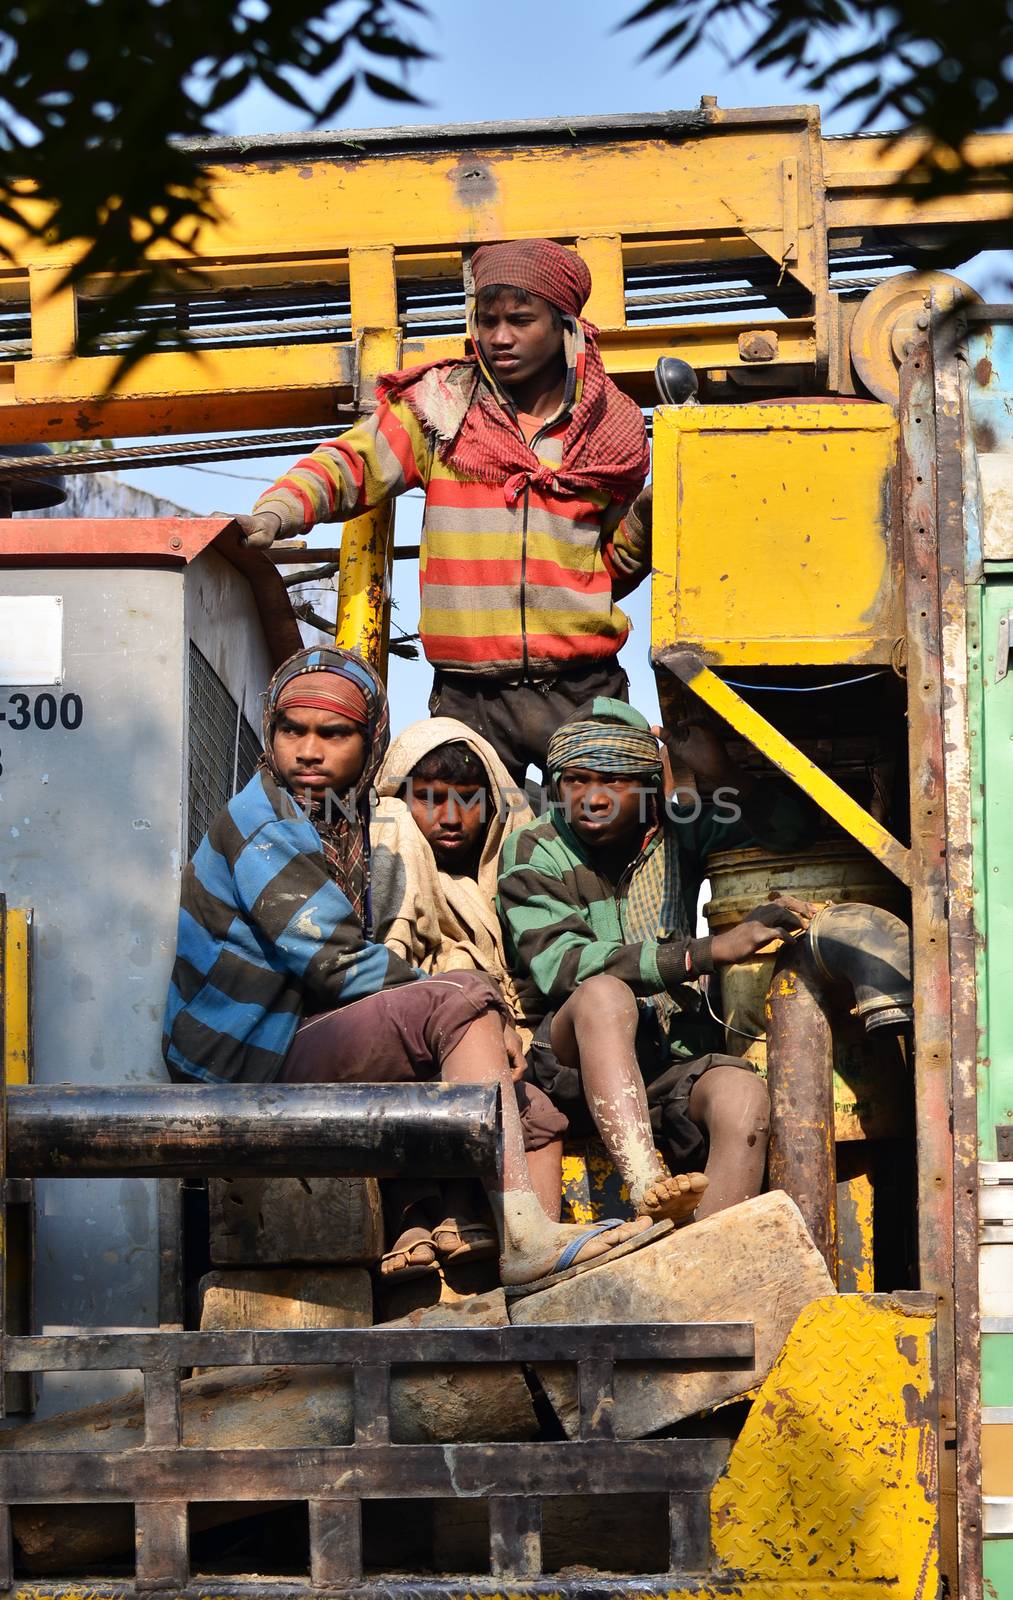 Jaipur, India - December 30, 2014: Unidentified travellers, mostly construction workers on the truck on MDecember 30, 2014 near Jaipur, India. Transport for workers is often overcrowded.